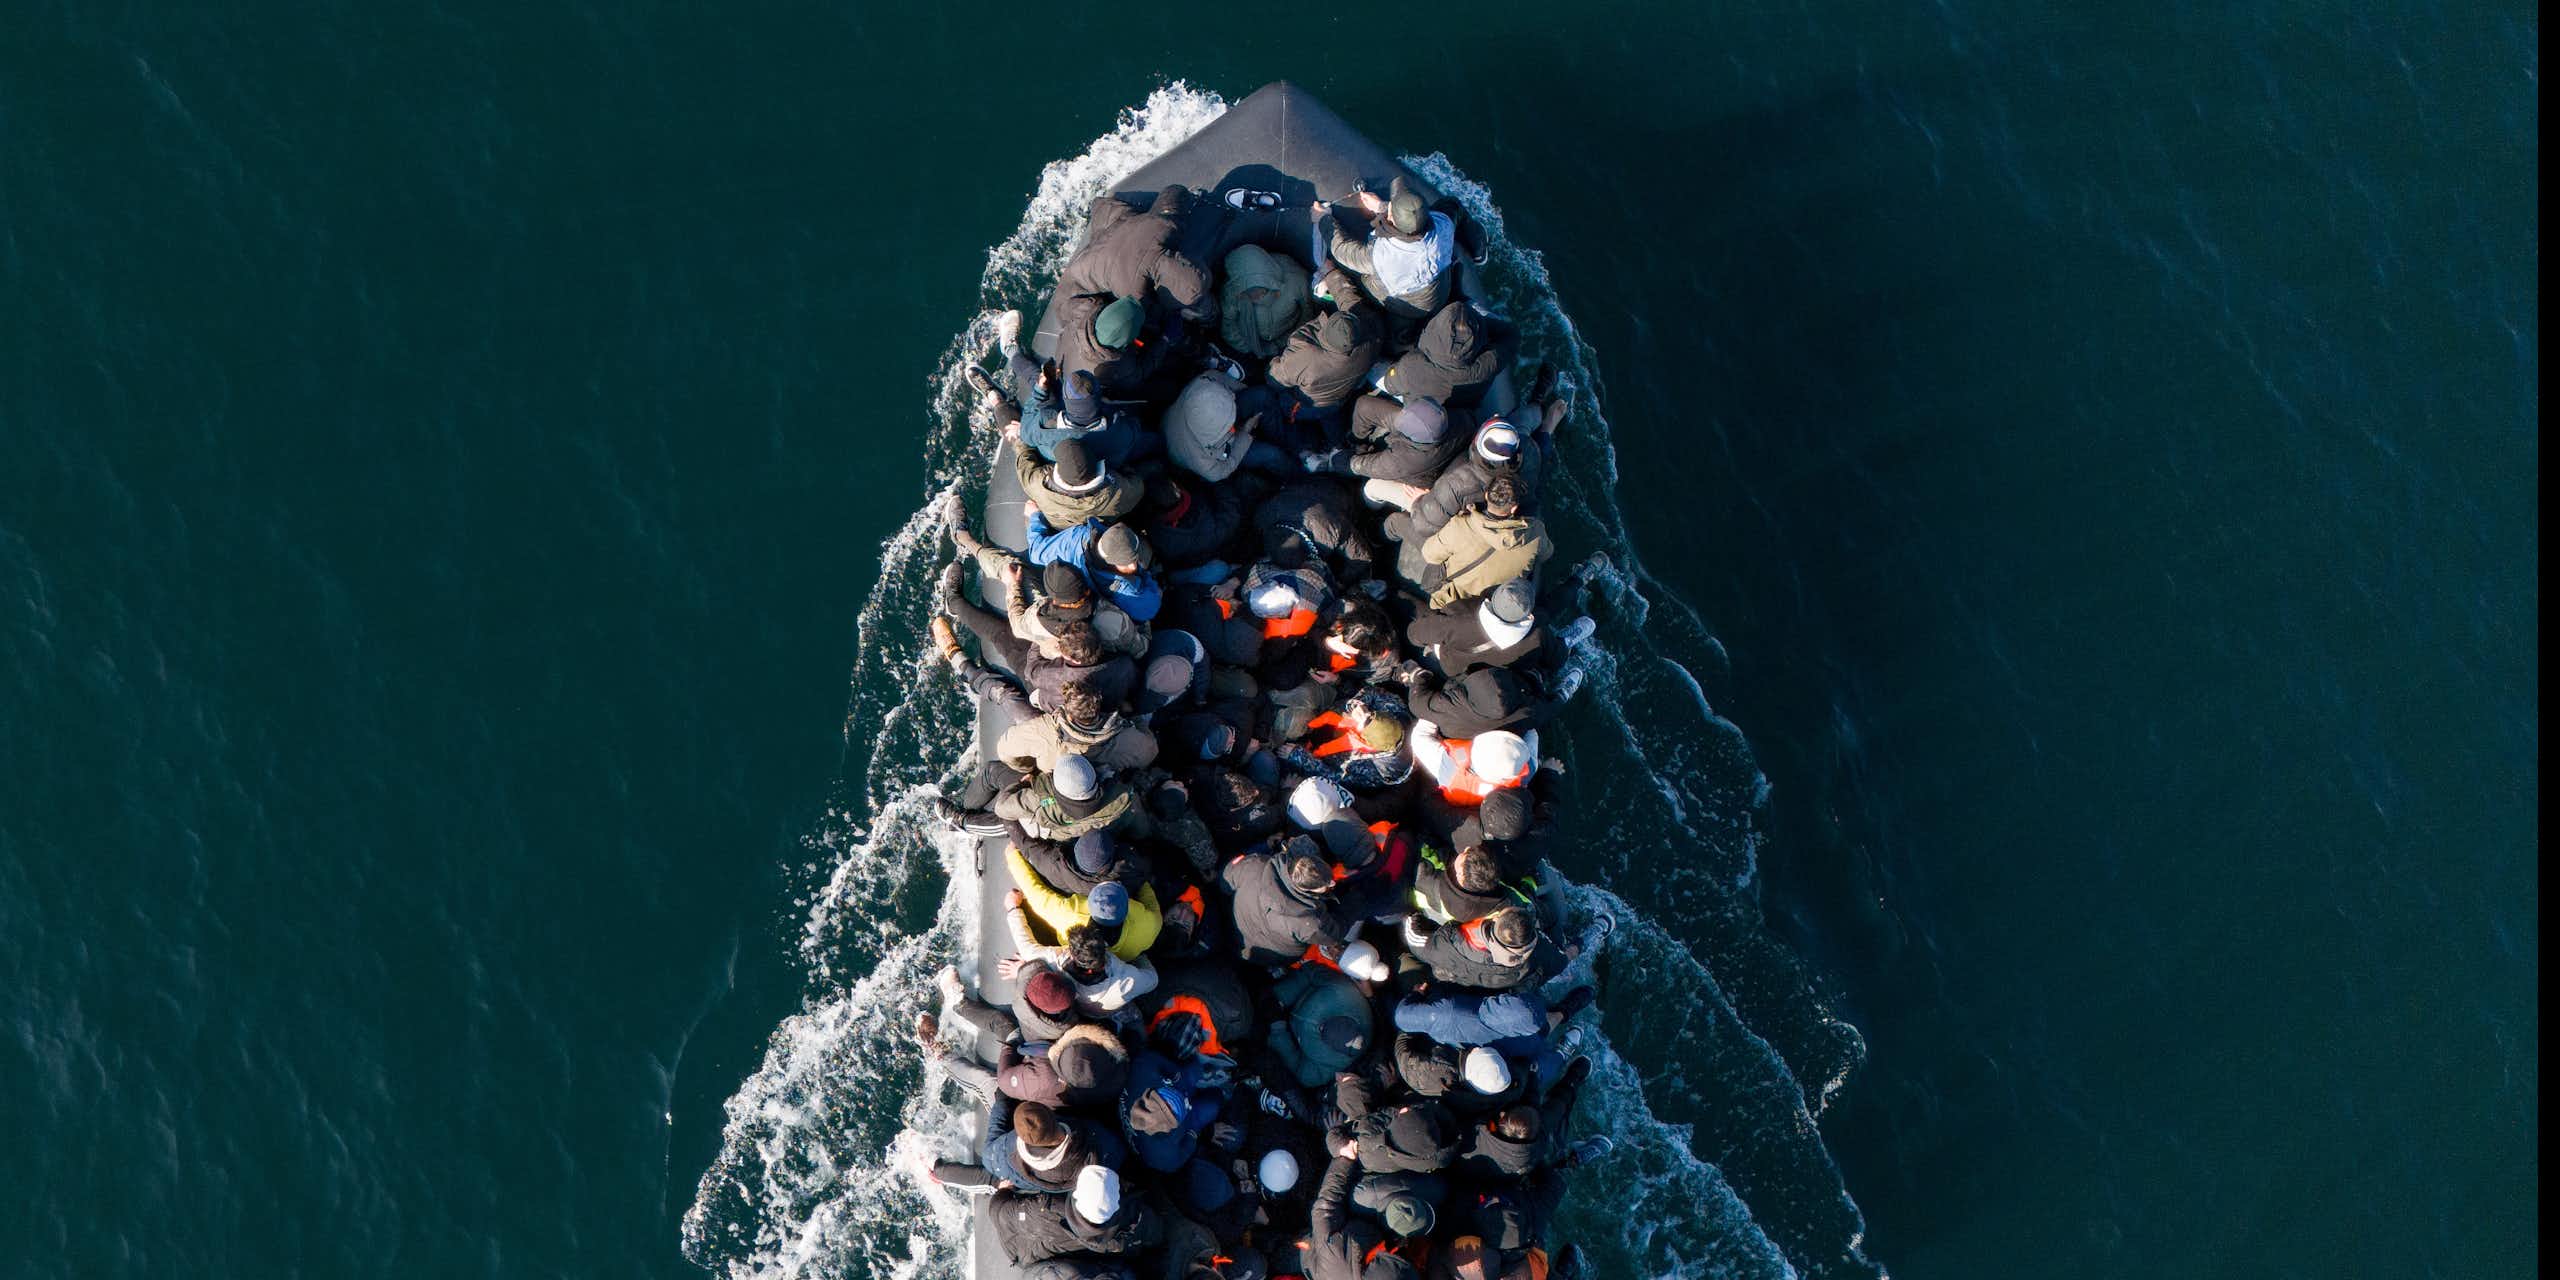 View from directly above of a small boat filled with people, surrounded by deep blue water